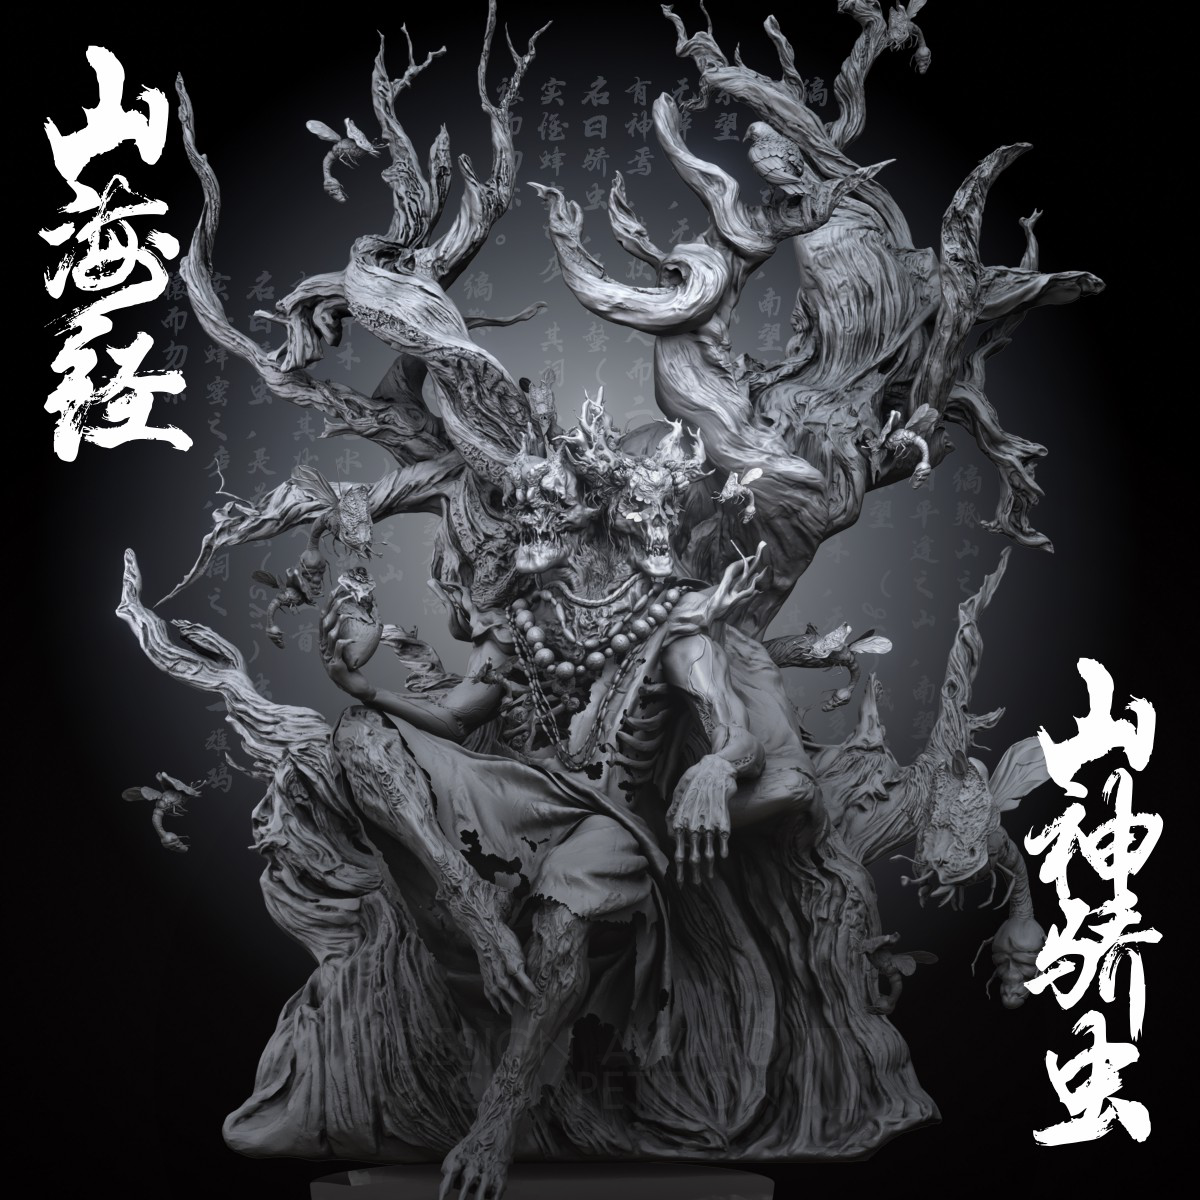 Shuhe Huang wins Bronze at the prestigious A' Computer Graphics, 3D Modeling, Texturing, and Rendering Design Award with Mountain God Game Character Design.